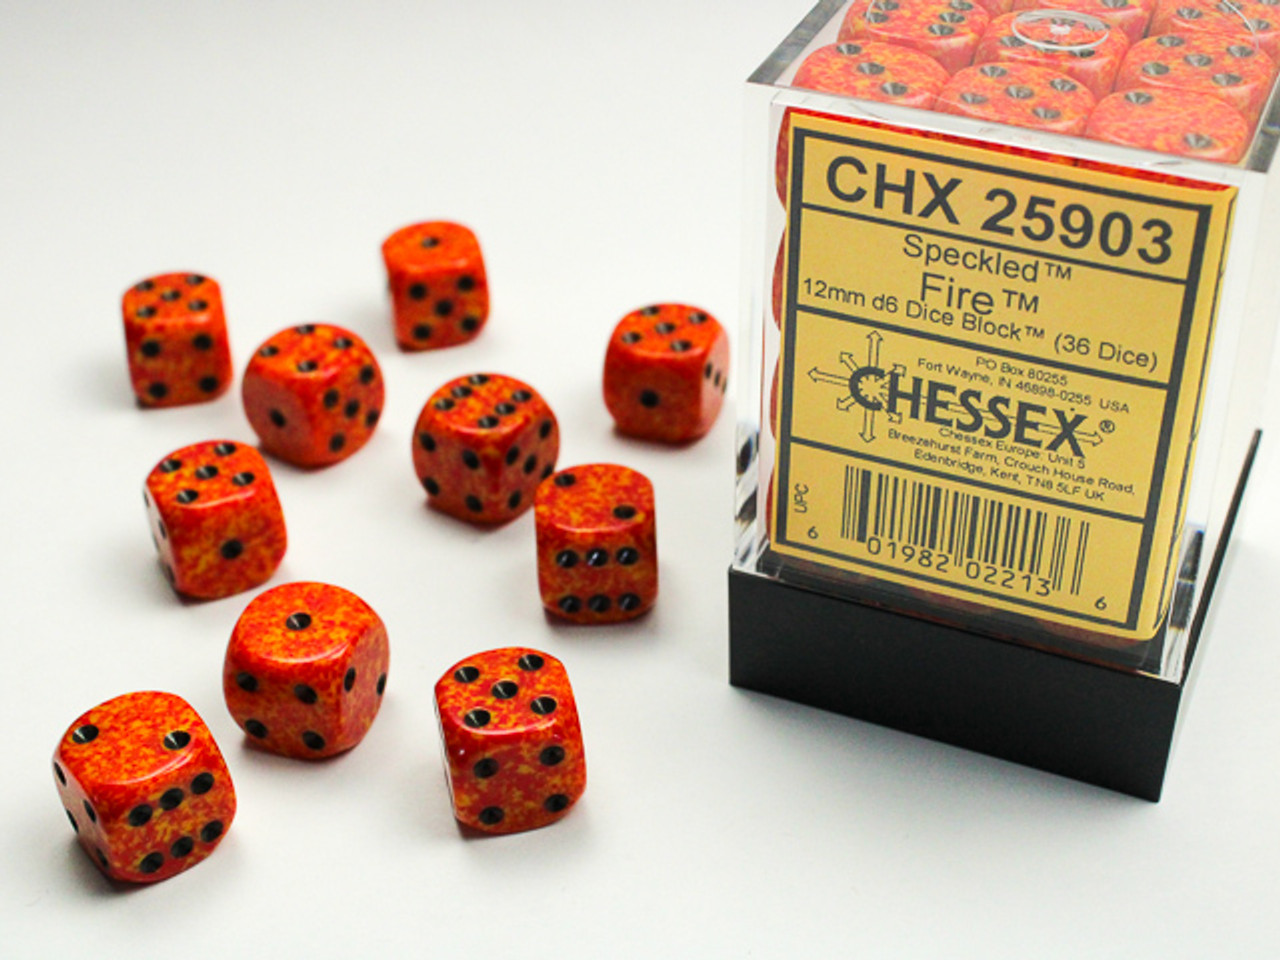 25903 - Speckled® 12mm d6 Fire Dice Block™ (36 dice)